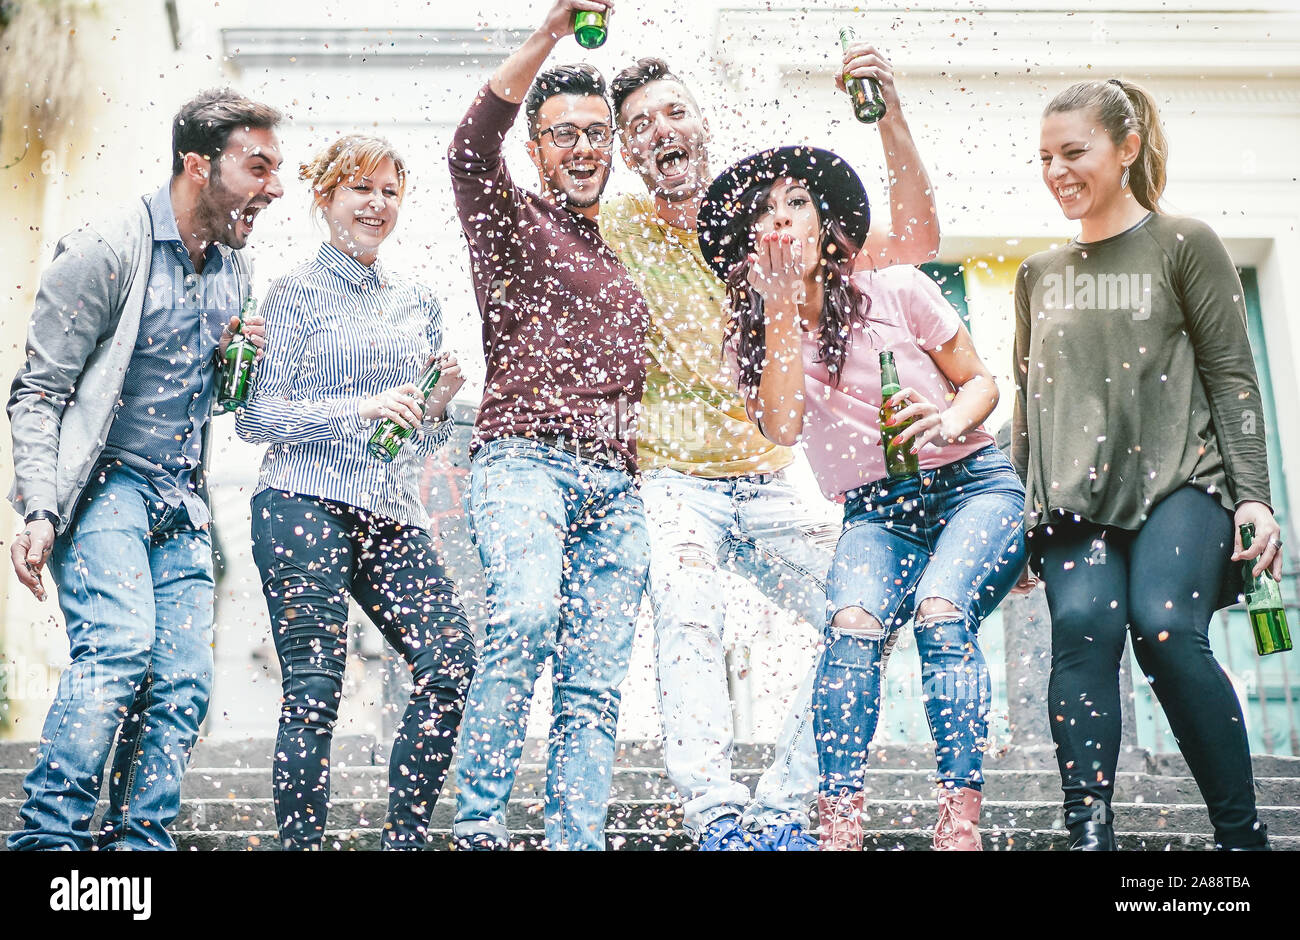 Group of happy friends doing party drinking beer and throwing confetti - Young millennial people having fun celebrating birthday and laughing together Stock Photo